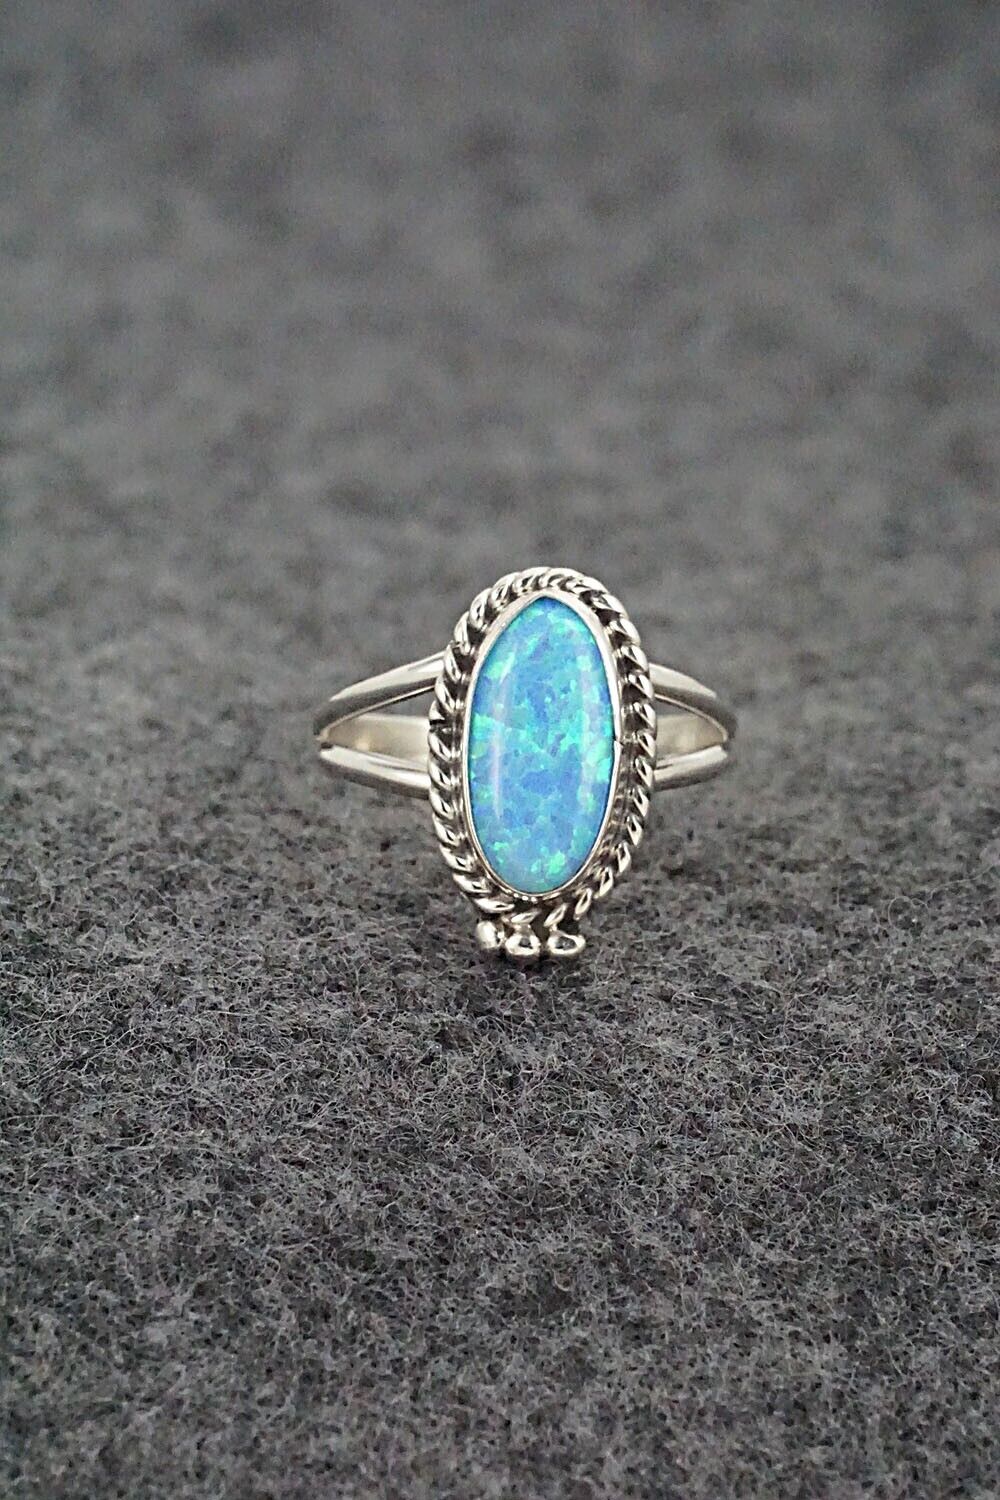 Opalite & Sterling Silver Ring - Jan Mariano - Size 5.5